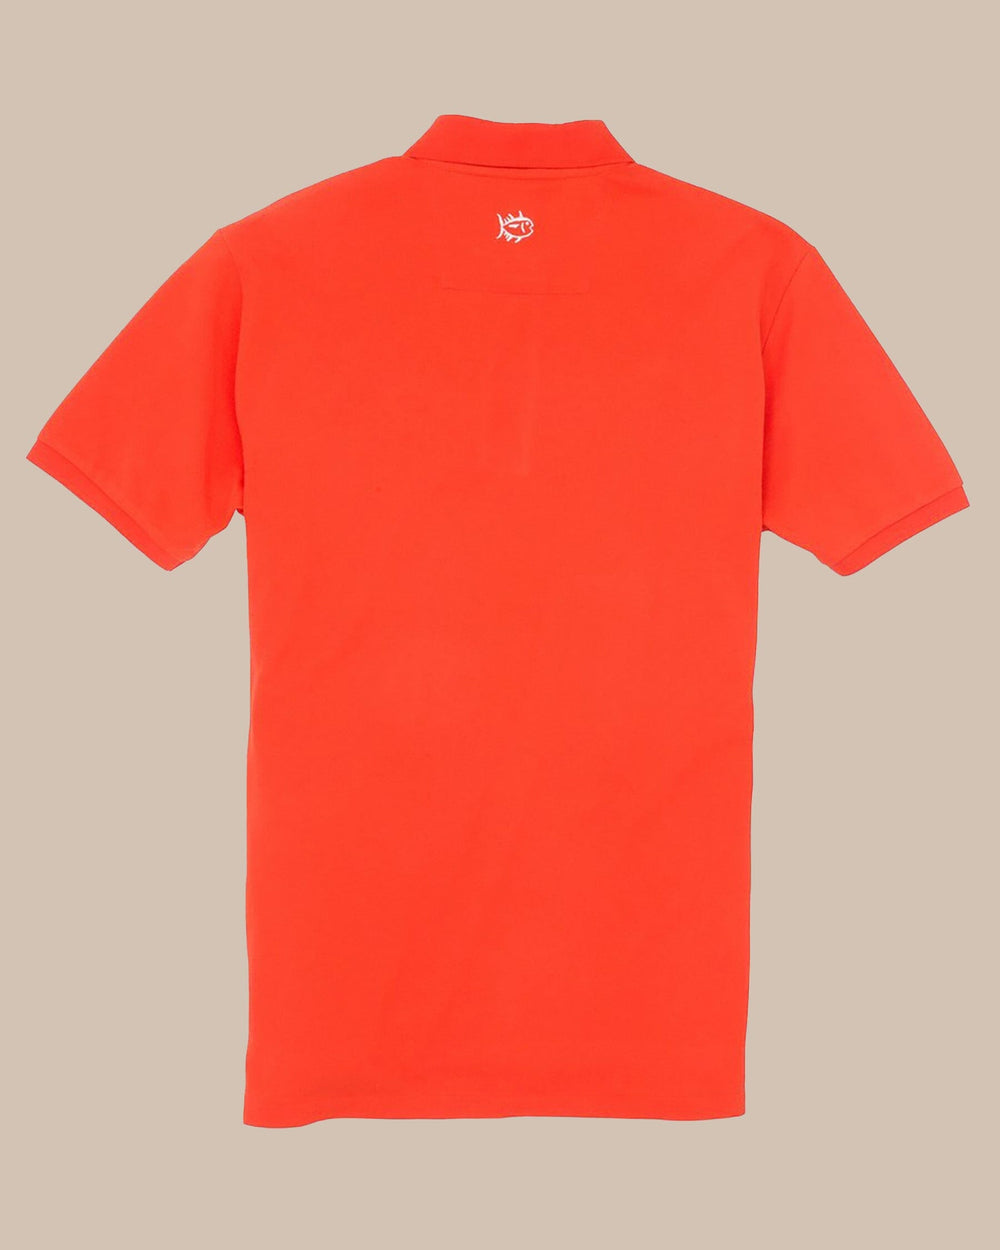 The back view of the Men's Orange Skipjack Gameday Colors Polo Shirt by Southern Tide - Endzone Orange